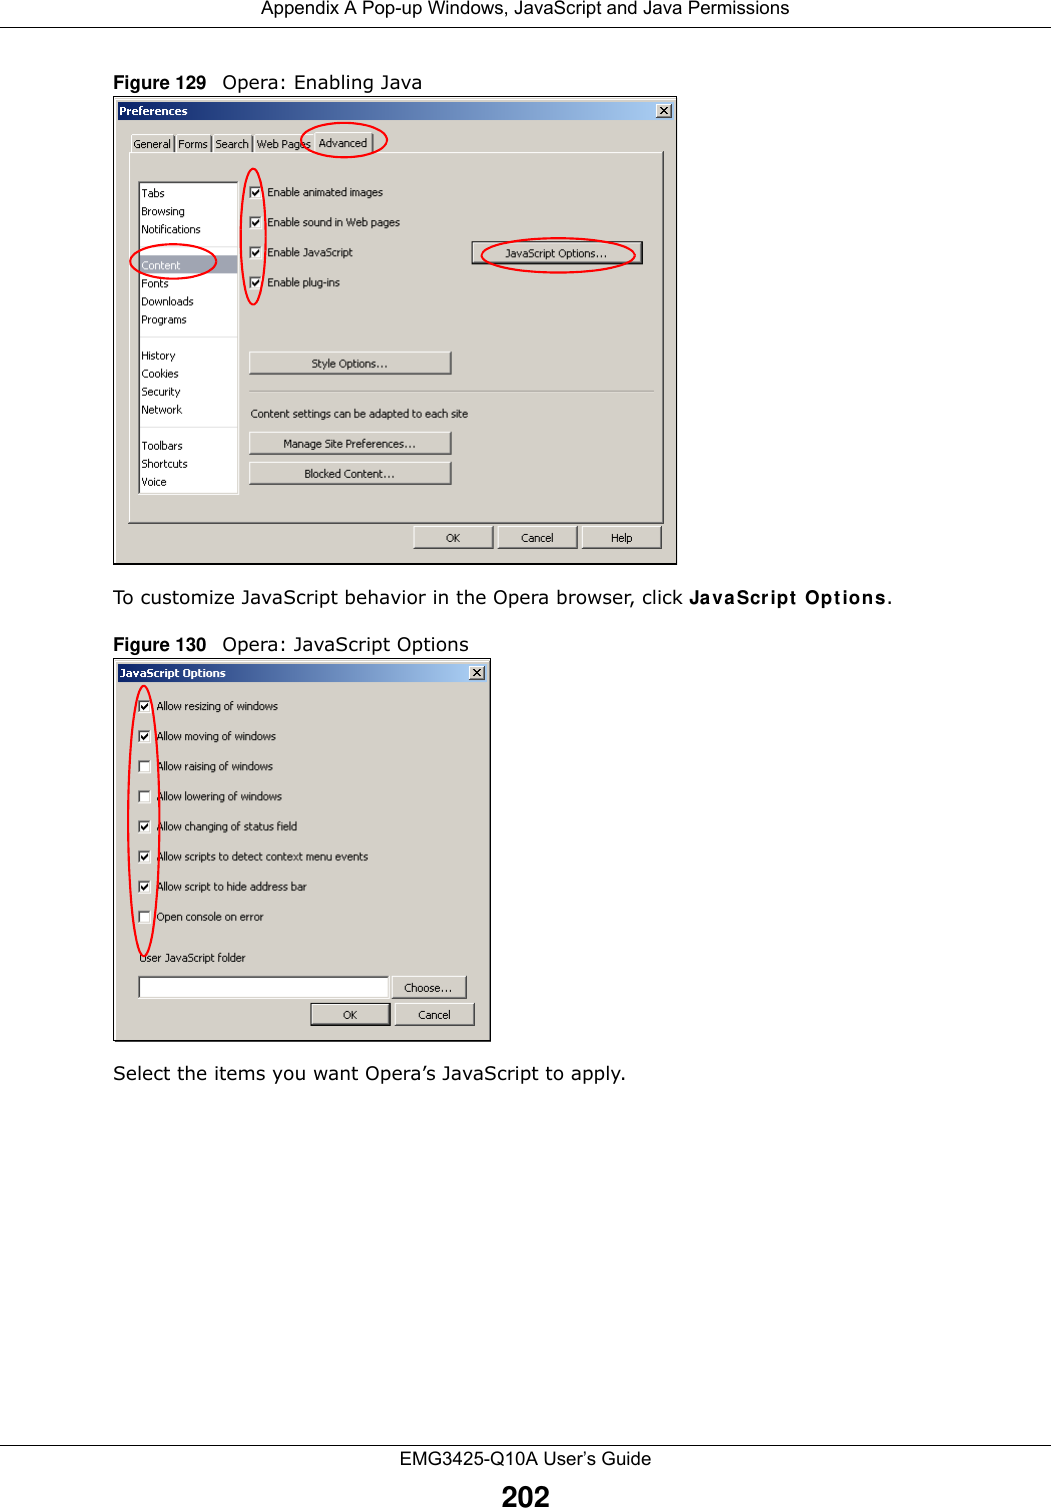 Appendix A Pop-up Windows, JavaScript and Java PermissionsEMG3425-Q10A User’s Guide202Figure 129   Opera: Enabling JavaTo customize JavaScript behavior in the Opera browser, click JavaScr ipt  Opt ions. Figure 130   Opera: JavaScript OptionsSelect the items you want Opera’s JavaScript to apply.